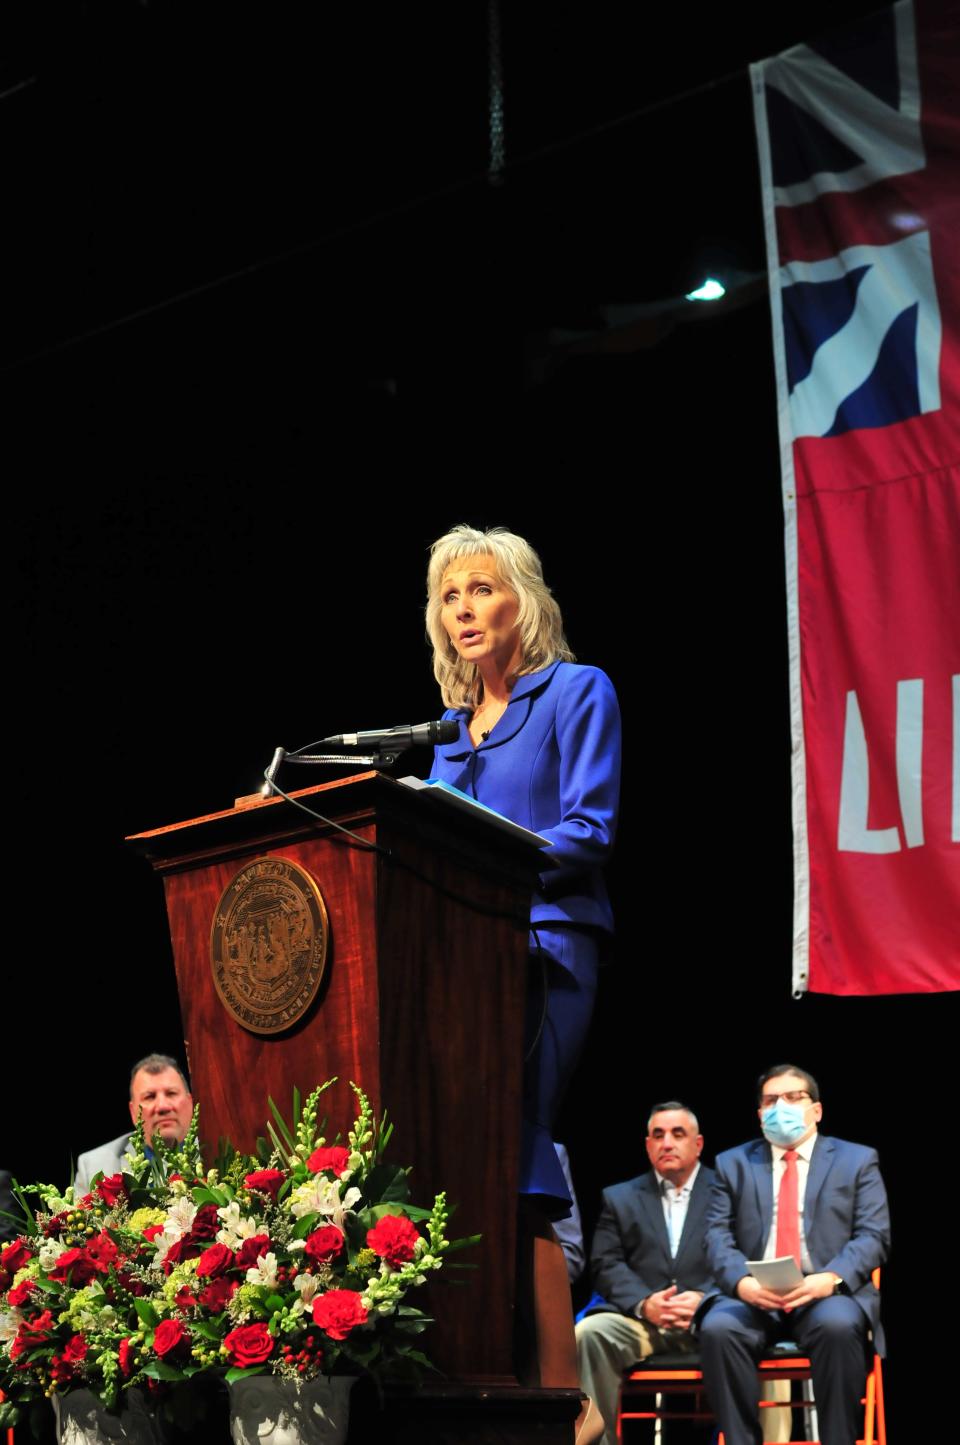 Mayor Shaunna O'Connell speaks during the City of Taunton inauguration ceremony at Taunton High School on Jan. 3, 2022 as city councilors look on. From left: John McCaul, Chris Coute and Phil Duarte.